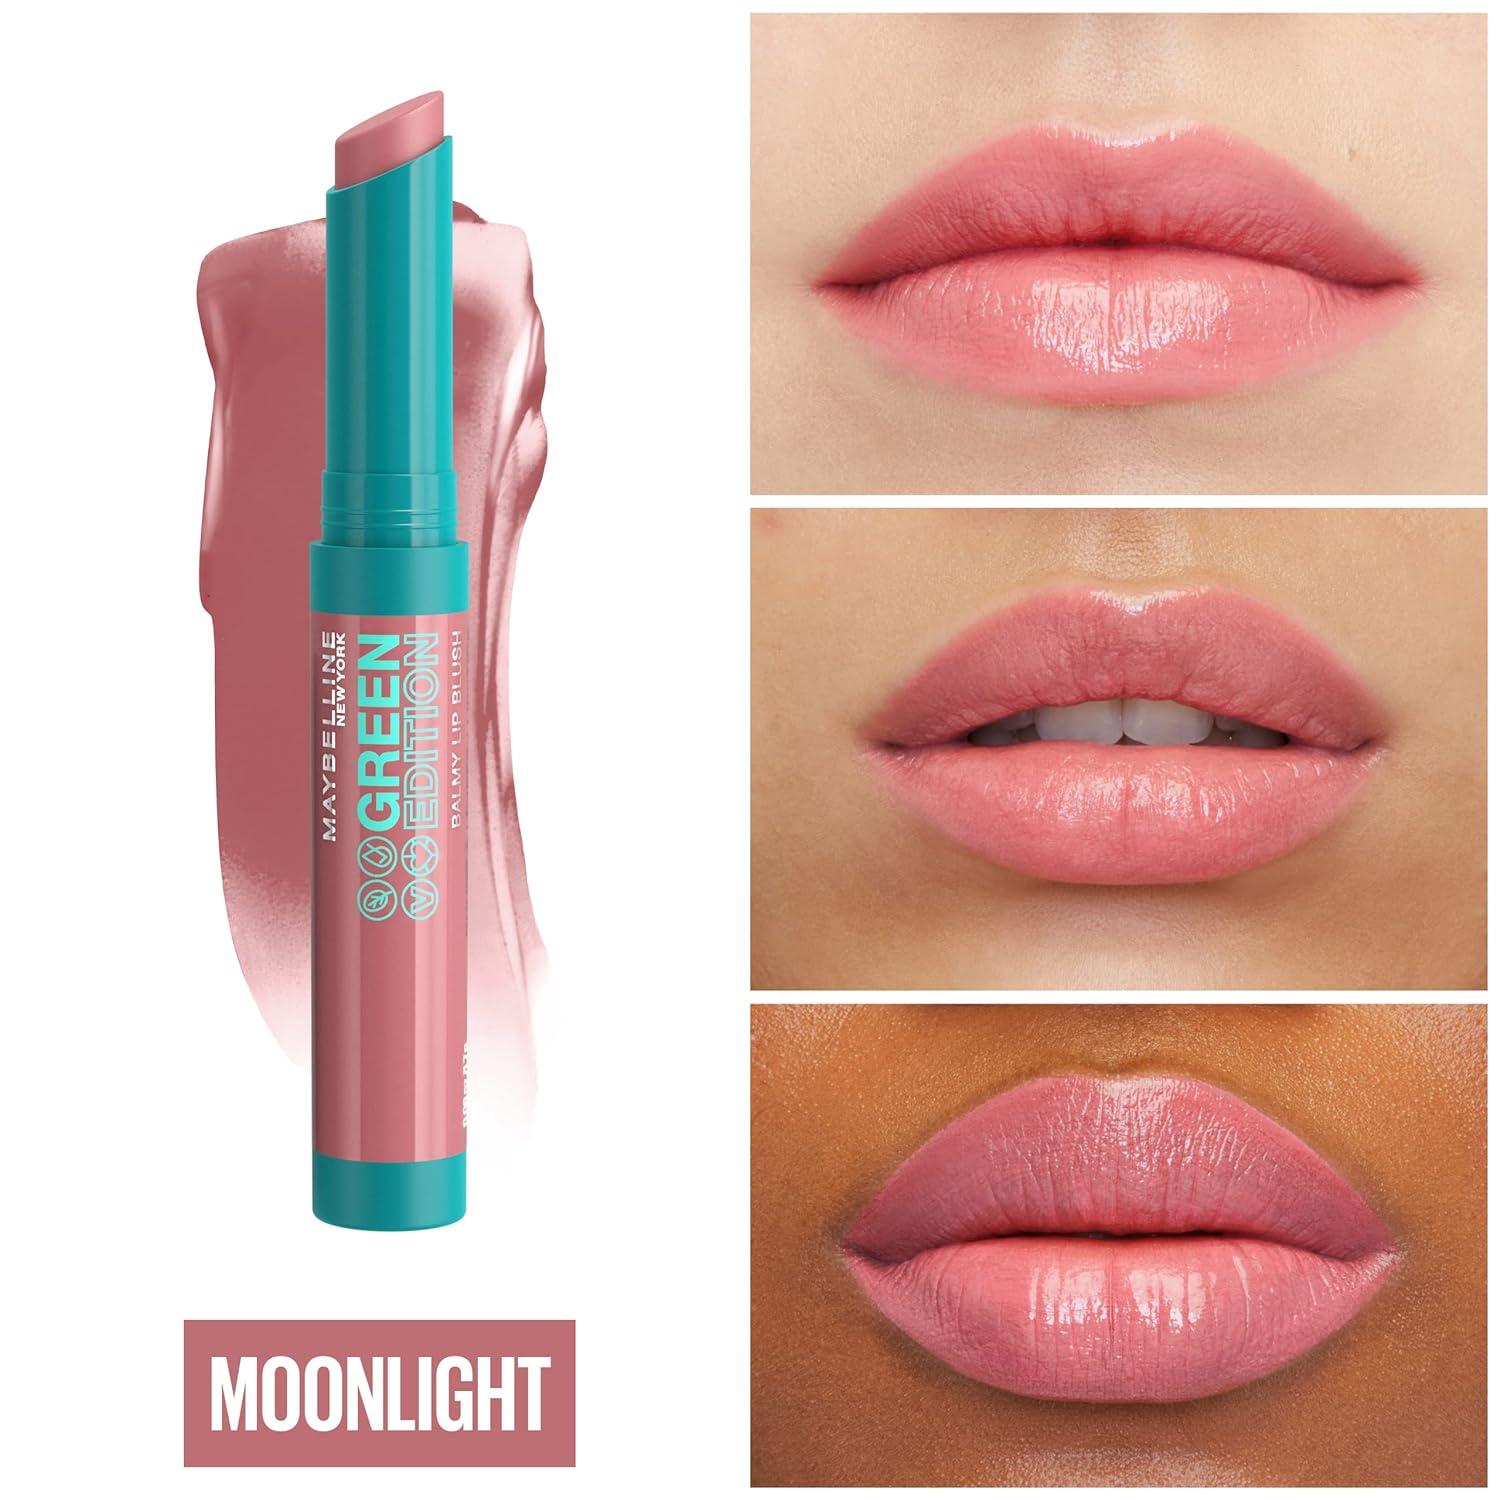 1 Mango With Count Green Blush Oil Nude Maybelline Pink Lip Balmy Moonlight Edition Formulated